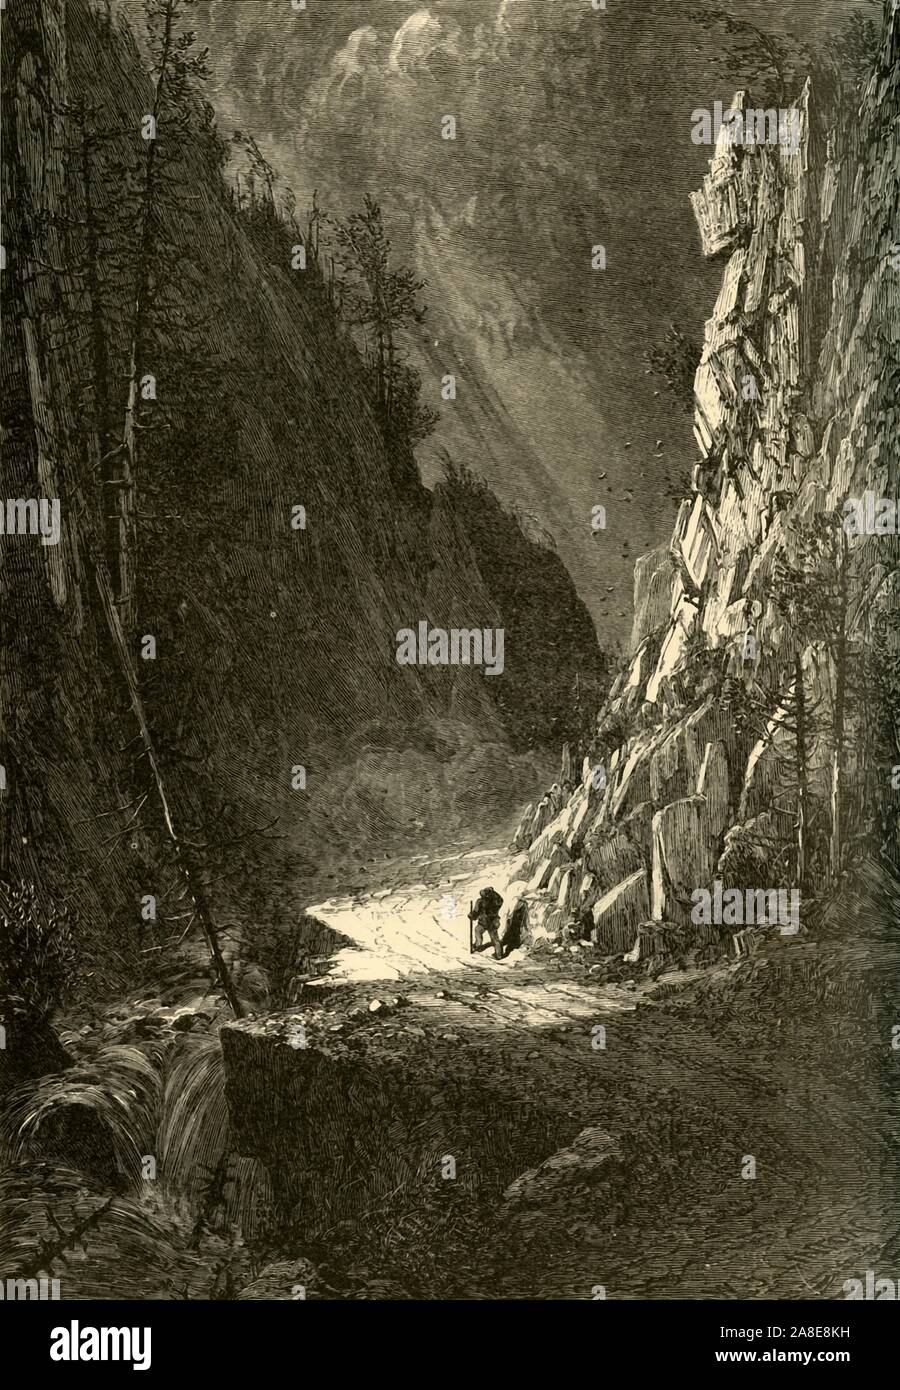 'Gate of the Crawford Notch', 1872. Mountain pass and rushing stream in the White Mountains, New Hampshire, USA. From &quot;Picturesque America; or, The Land We Live In, A Delineation by Pen and Pencil of the Mountains, Rivers, Lakes...with Illustrations on Steel and Wood by Eminent American Artists&quot; Vol. I, edited by William Cullen Bryant. [D. Appleton and Company, New York, 1872] Stock Photo